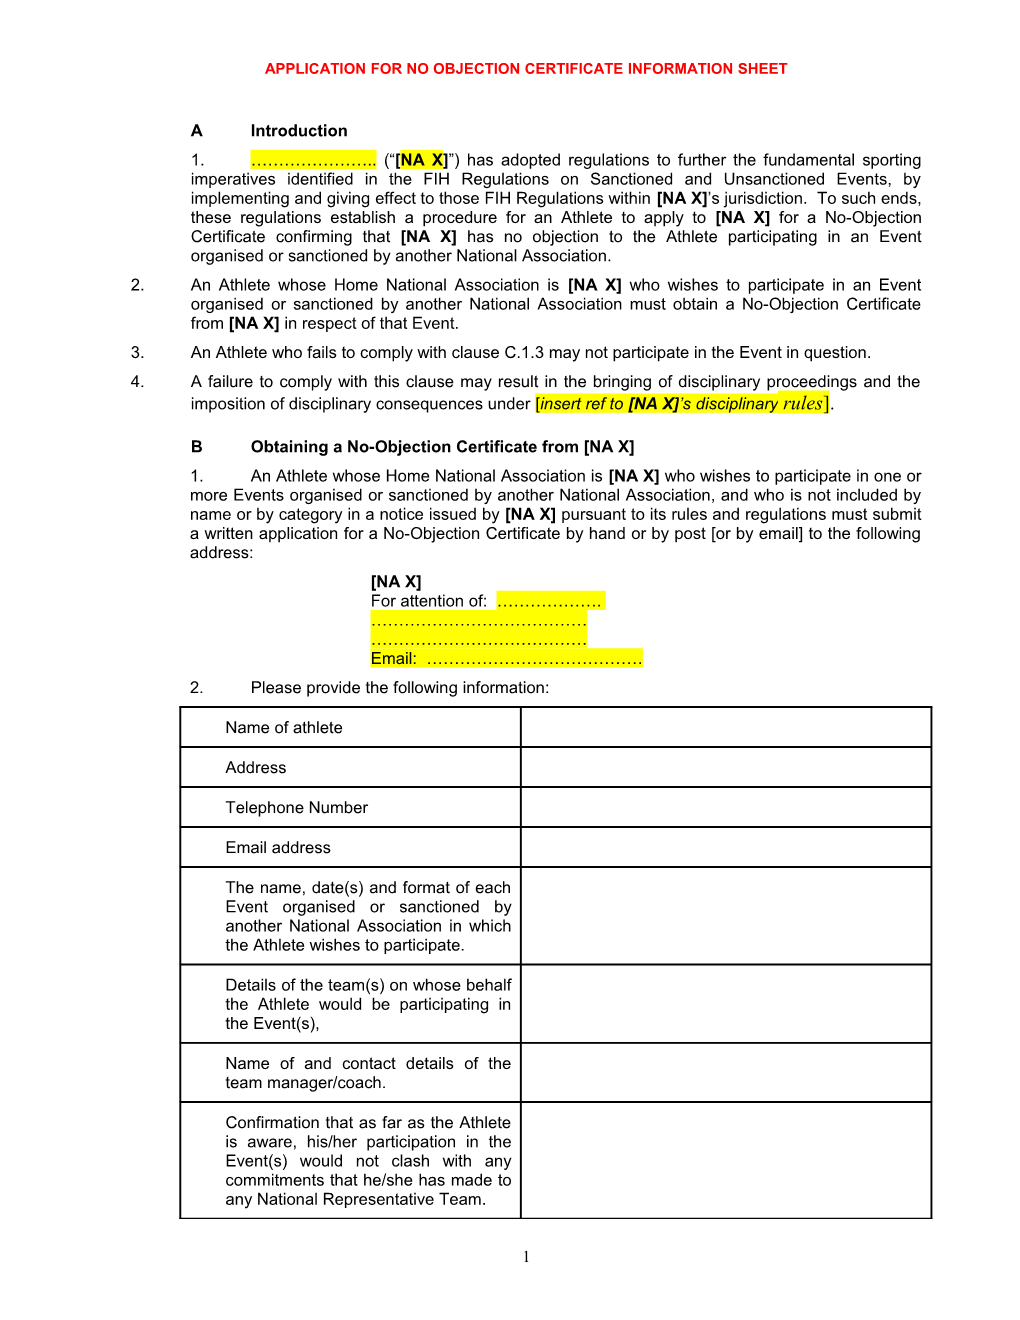 Application for No Objection Certificate Information Sheet